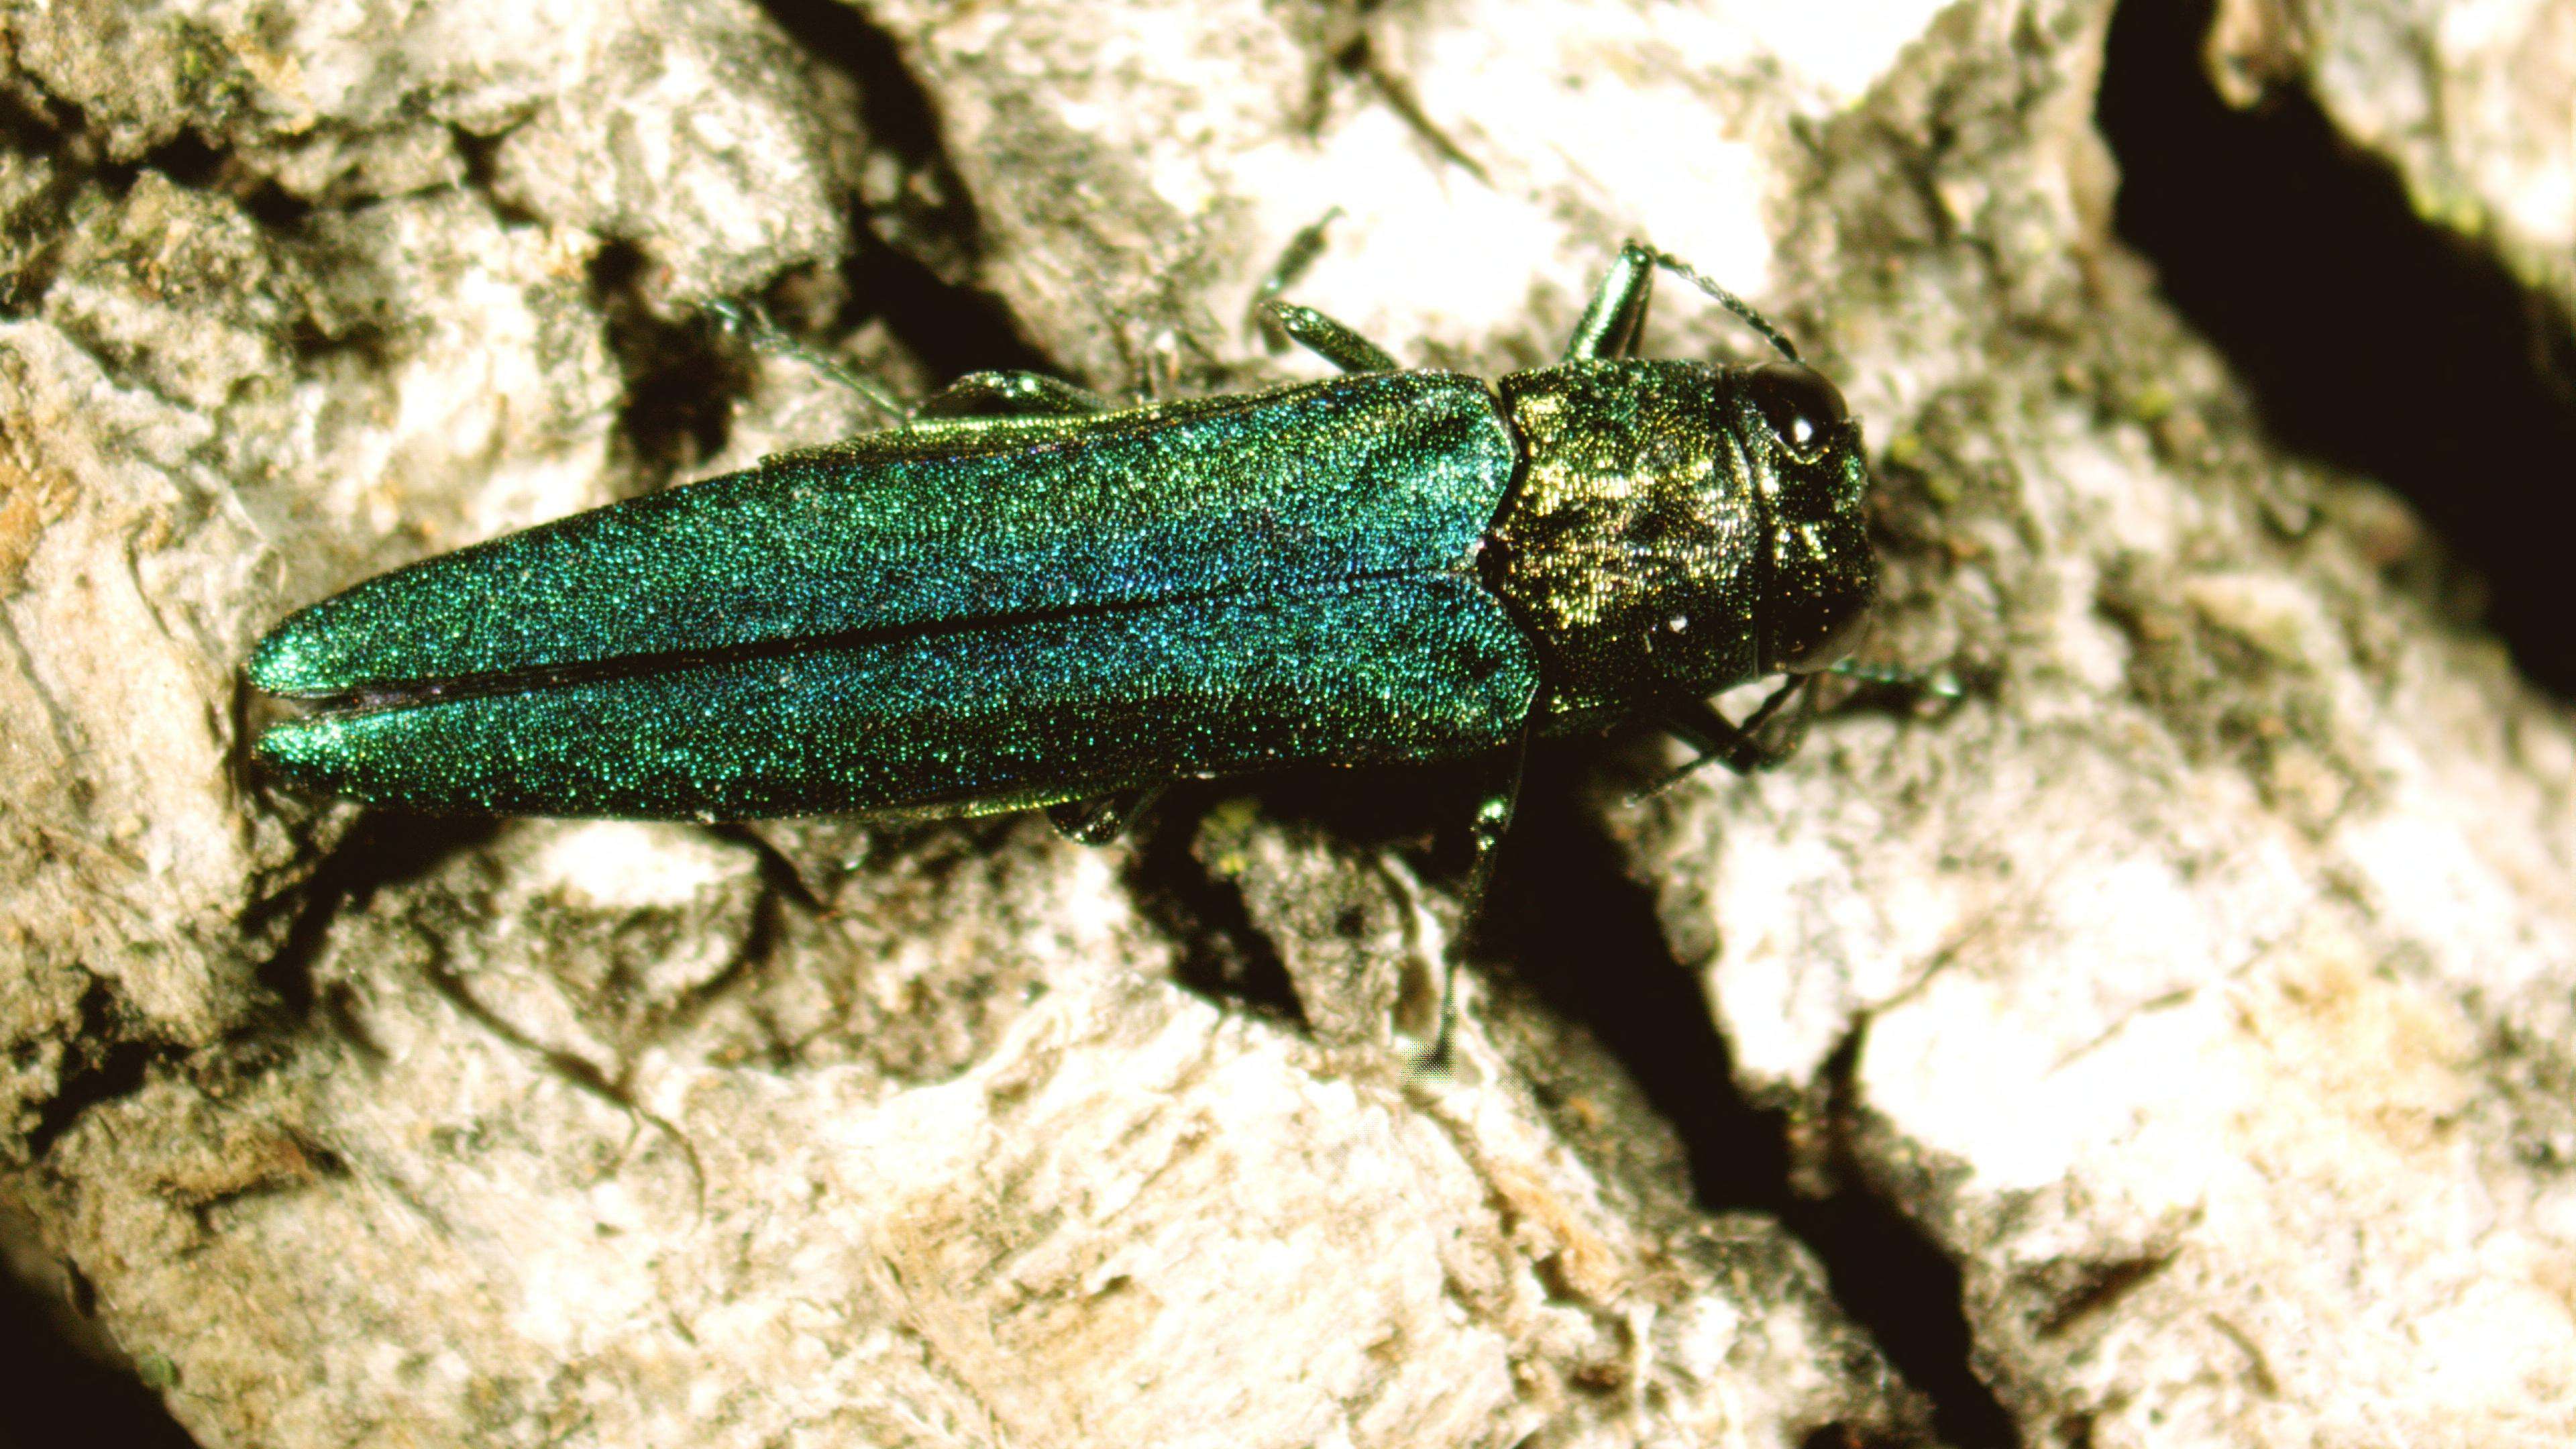 Close up of an adult emerald ash borer on bark of a tree; beetle is bright, metallic green, measures about one-half inch long and has a flattened back.